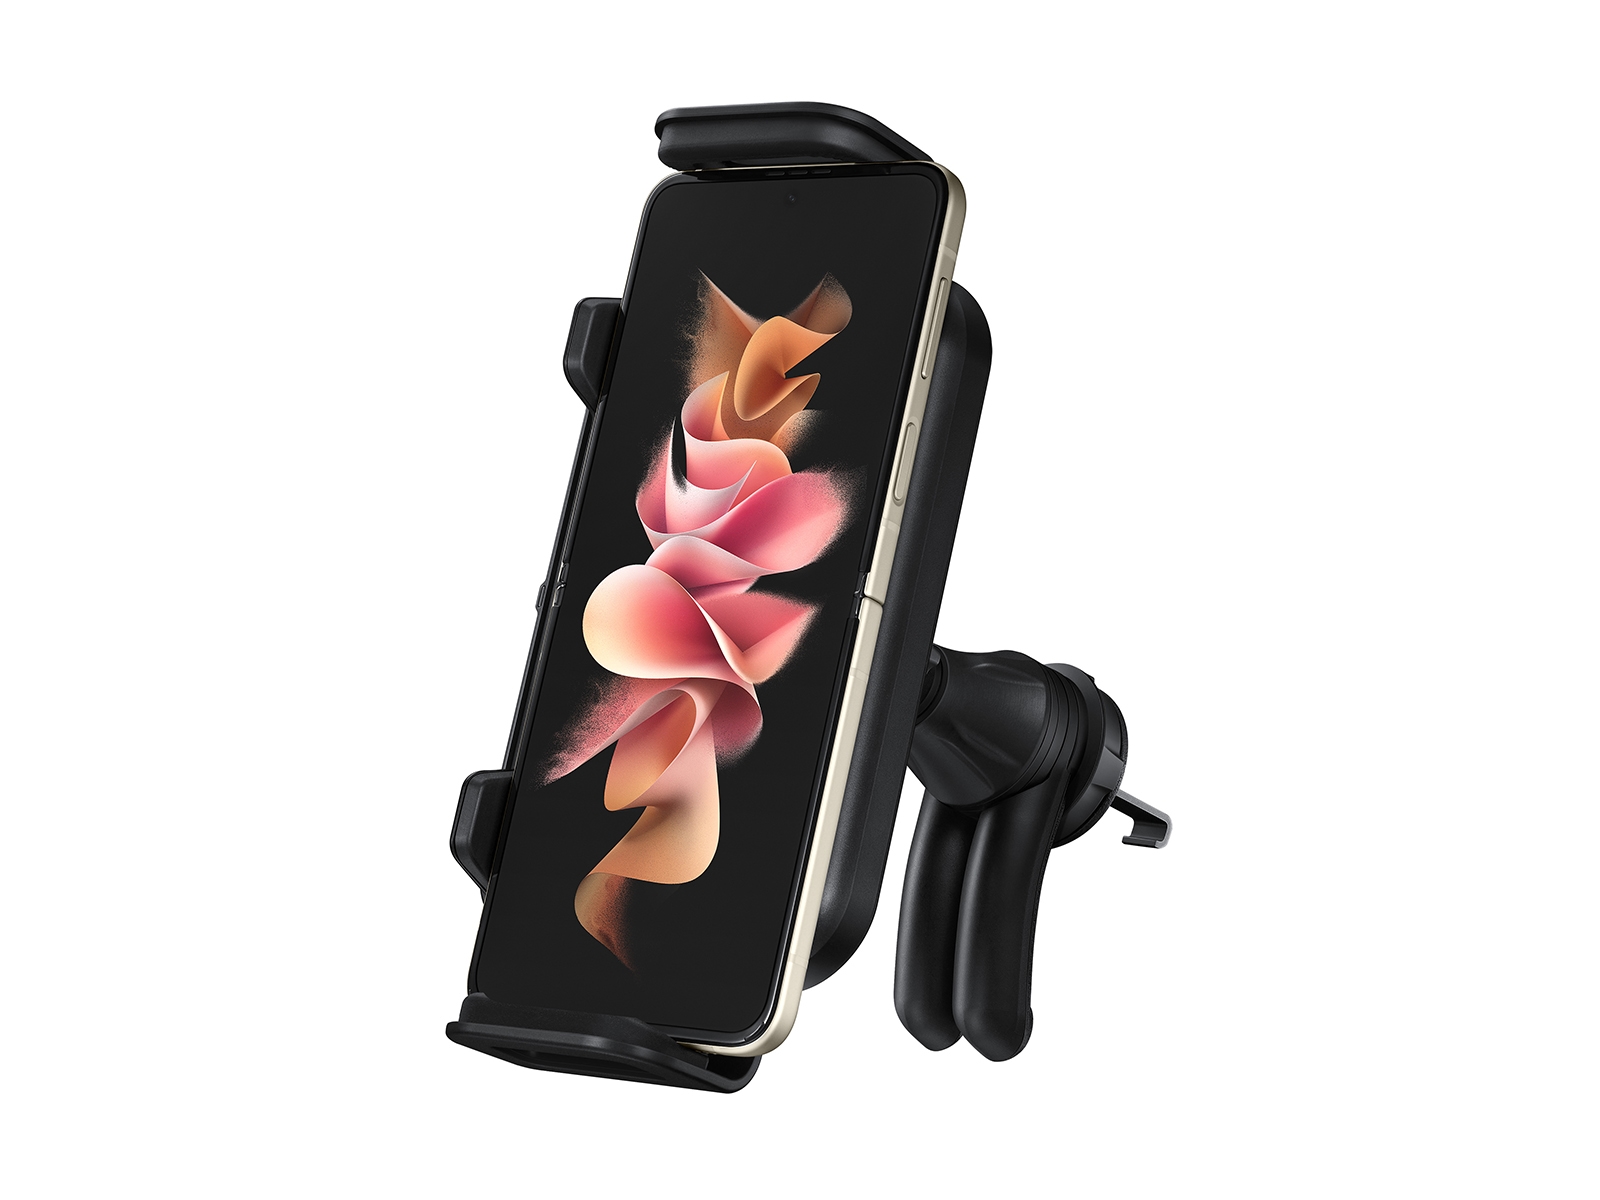  Cell Phone Automobile Accessories - Cell Phone